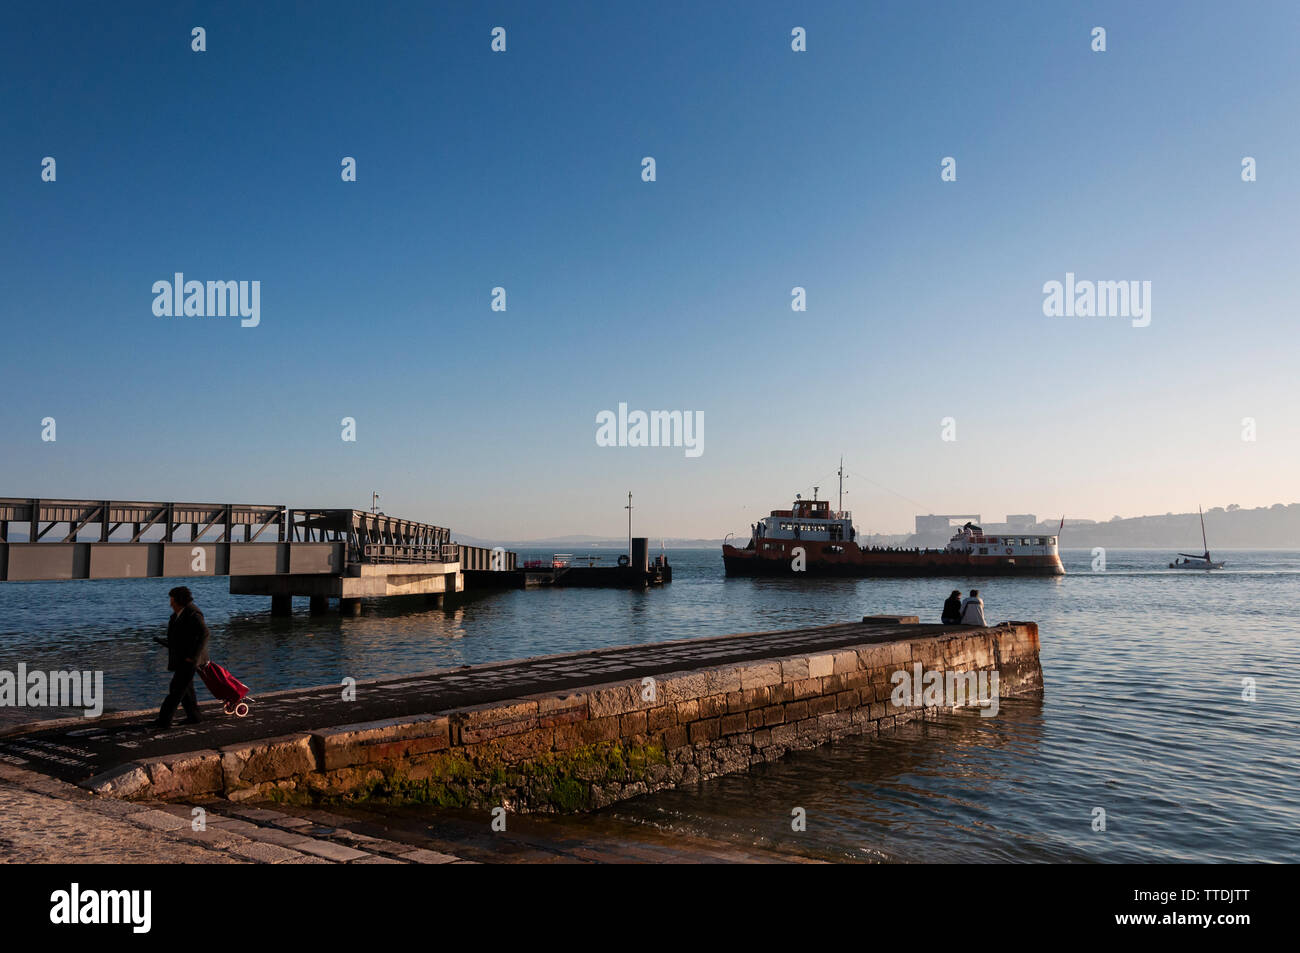 Lisbon, Portugal - January 22, 2012: View of the Cais do Sodre with a ferry boat (cacilheiro) arriving and people on a peer, in the city of Lisbon, Po Stock Photo